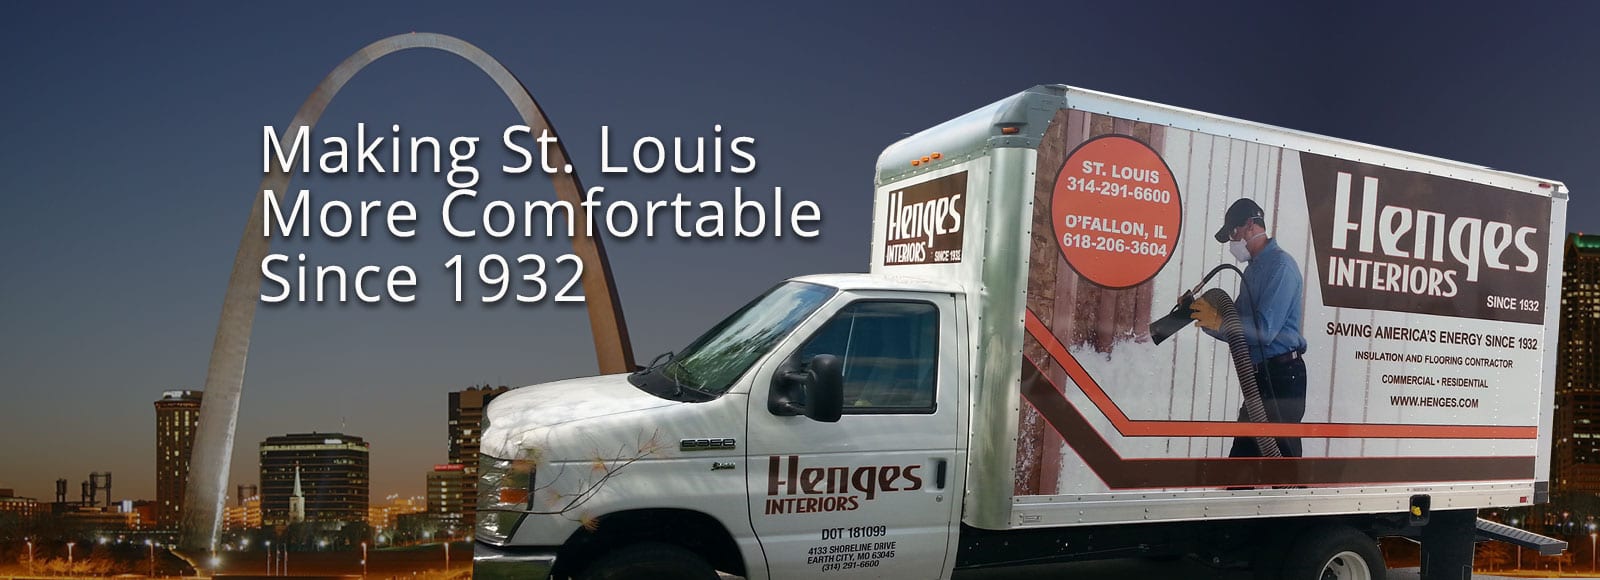 Henges truck with St. Louis background